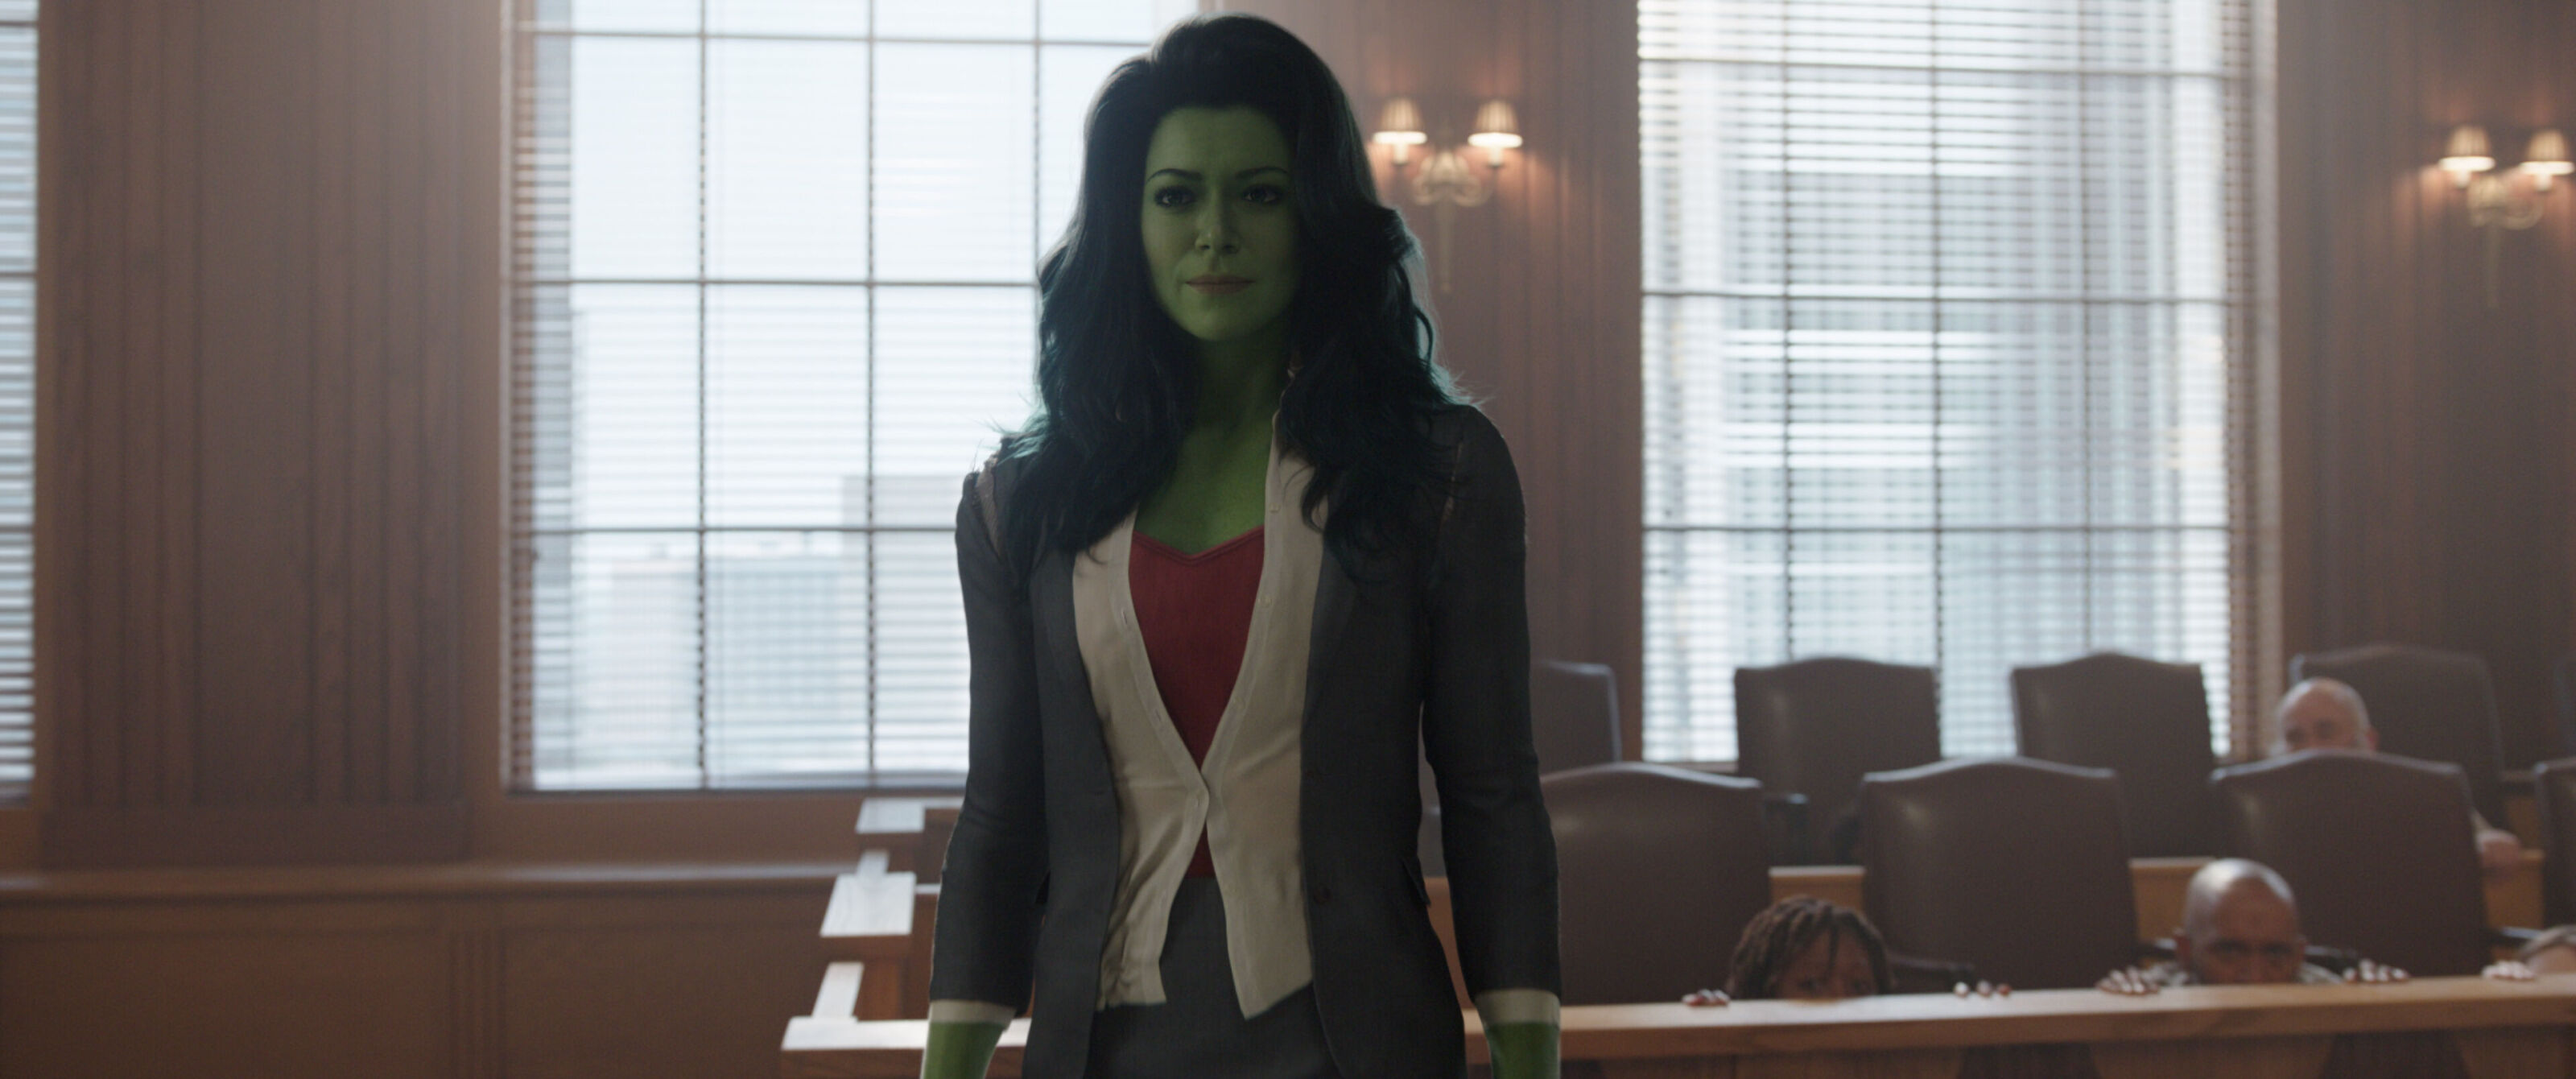 She-Hulk' Biffed the Opportunity to Ditch That Awful Name in Episode 5